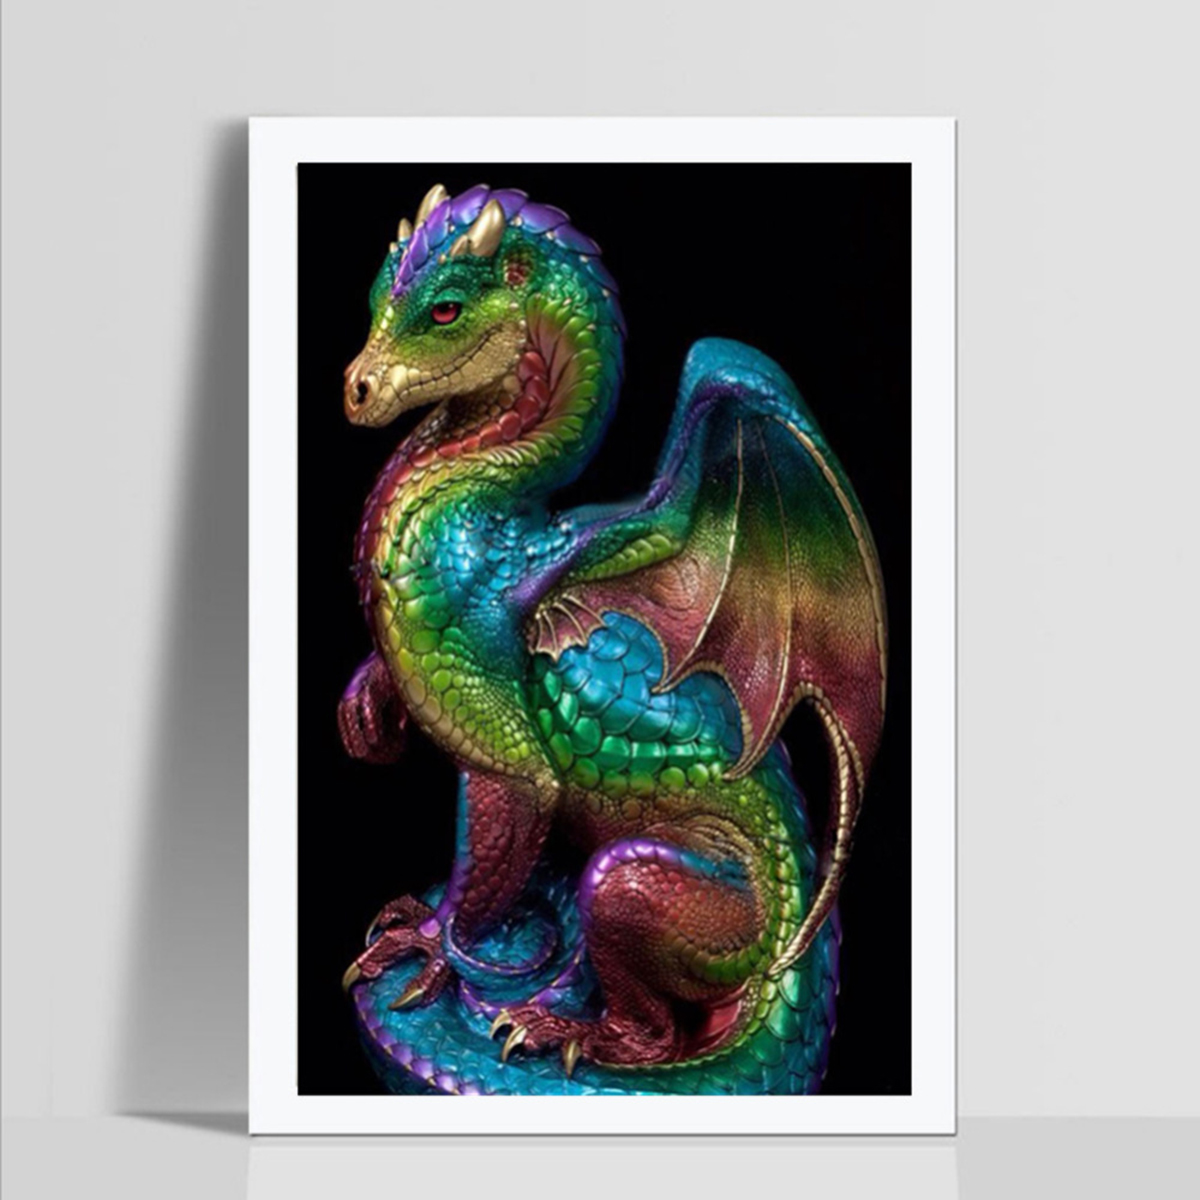 5D-DIY-Diamond-Painting-Dragon-Monster-Art-Craft-Kit-Handmade-Wall-Decorations-Gifts-for-Kids-Adult-1702867-4